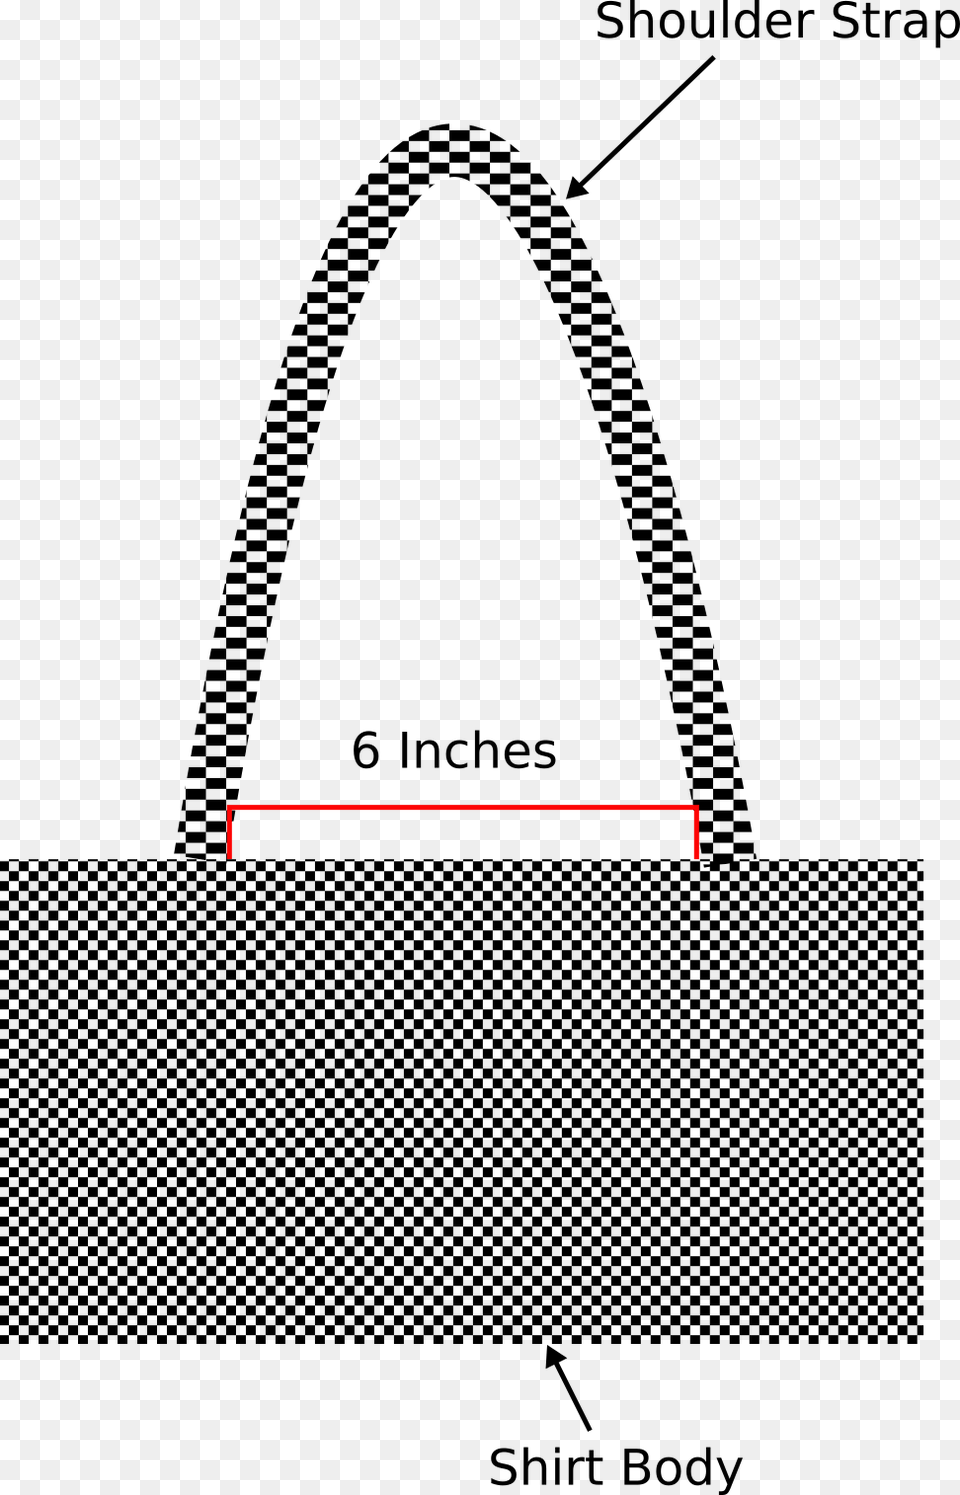 How To Make A Chainmail Shirt Making The Shoulder Straps Shoulder Strap, Accessories, Bag, Handbag, Purse Free Png Download